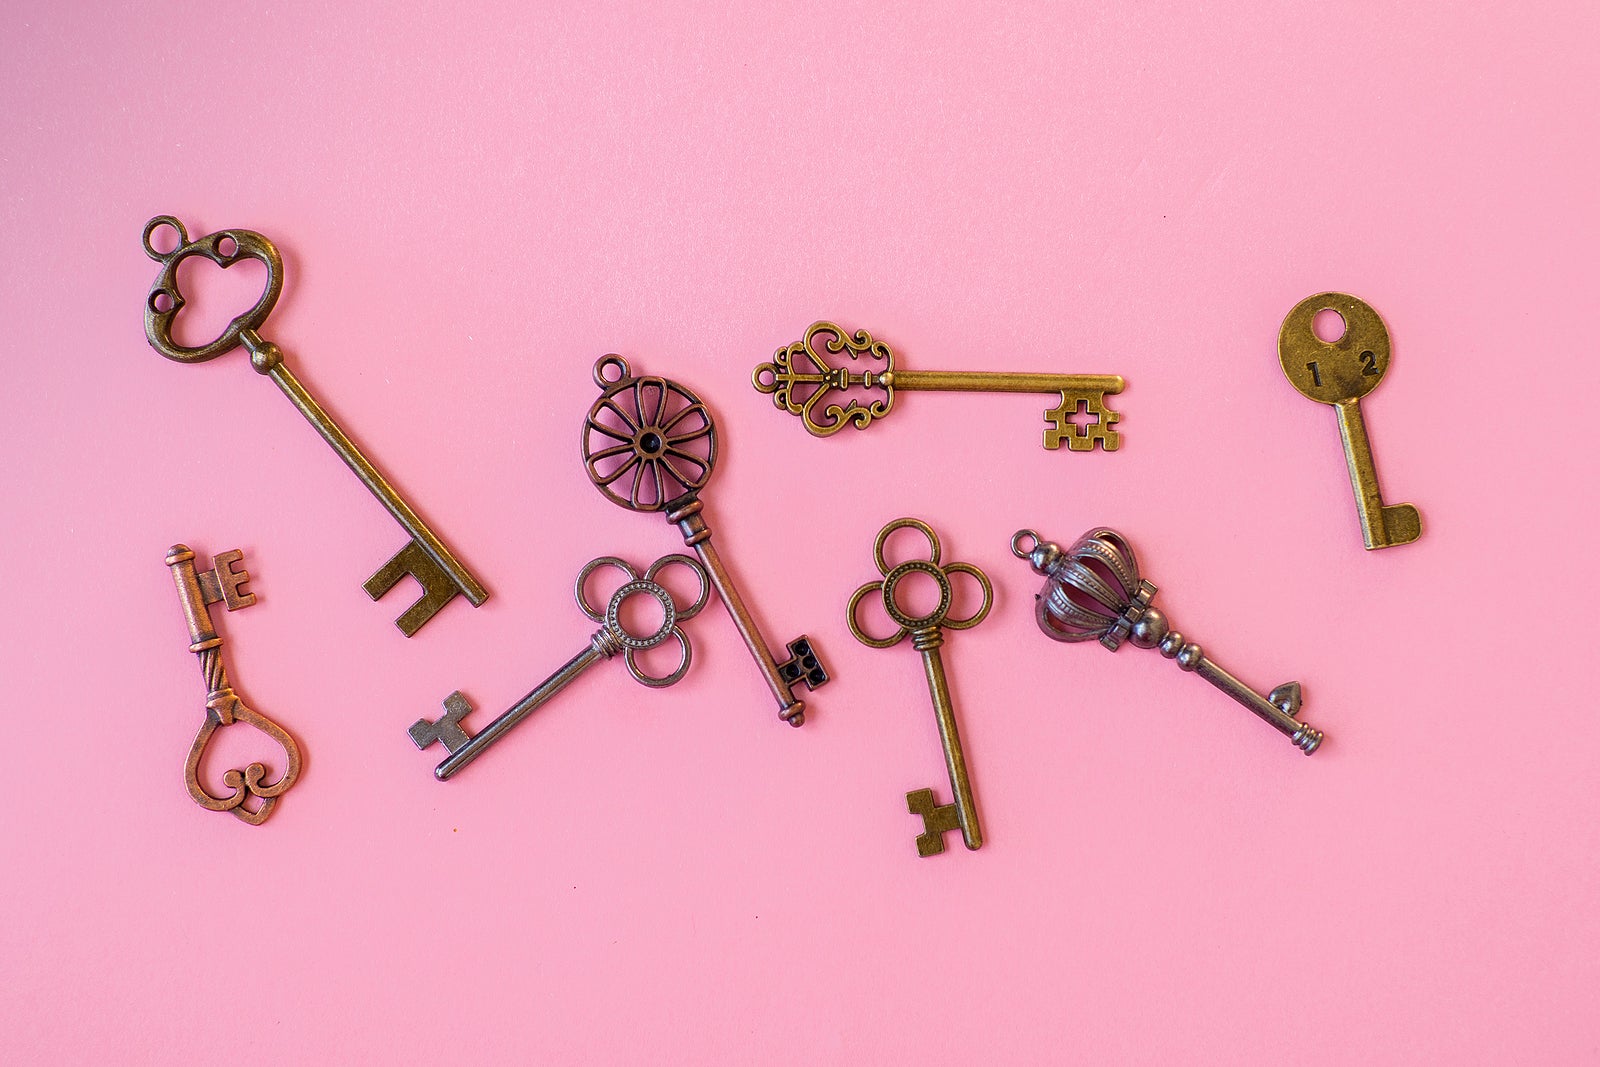 Many different old keys from different locks, scattered chaotically, flat lay. Finding the right key, encryption, concept. Retro vintage copper keys on a pink background